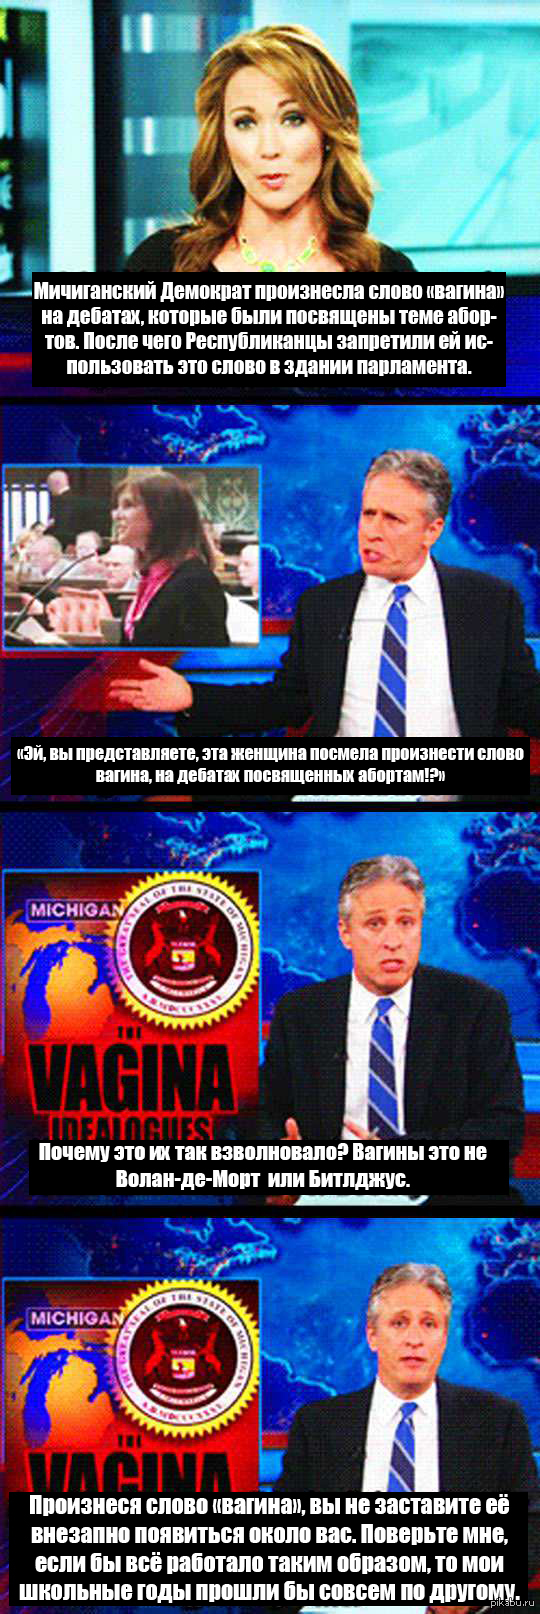  .   "The Daily Show"  .  ,  9gag